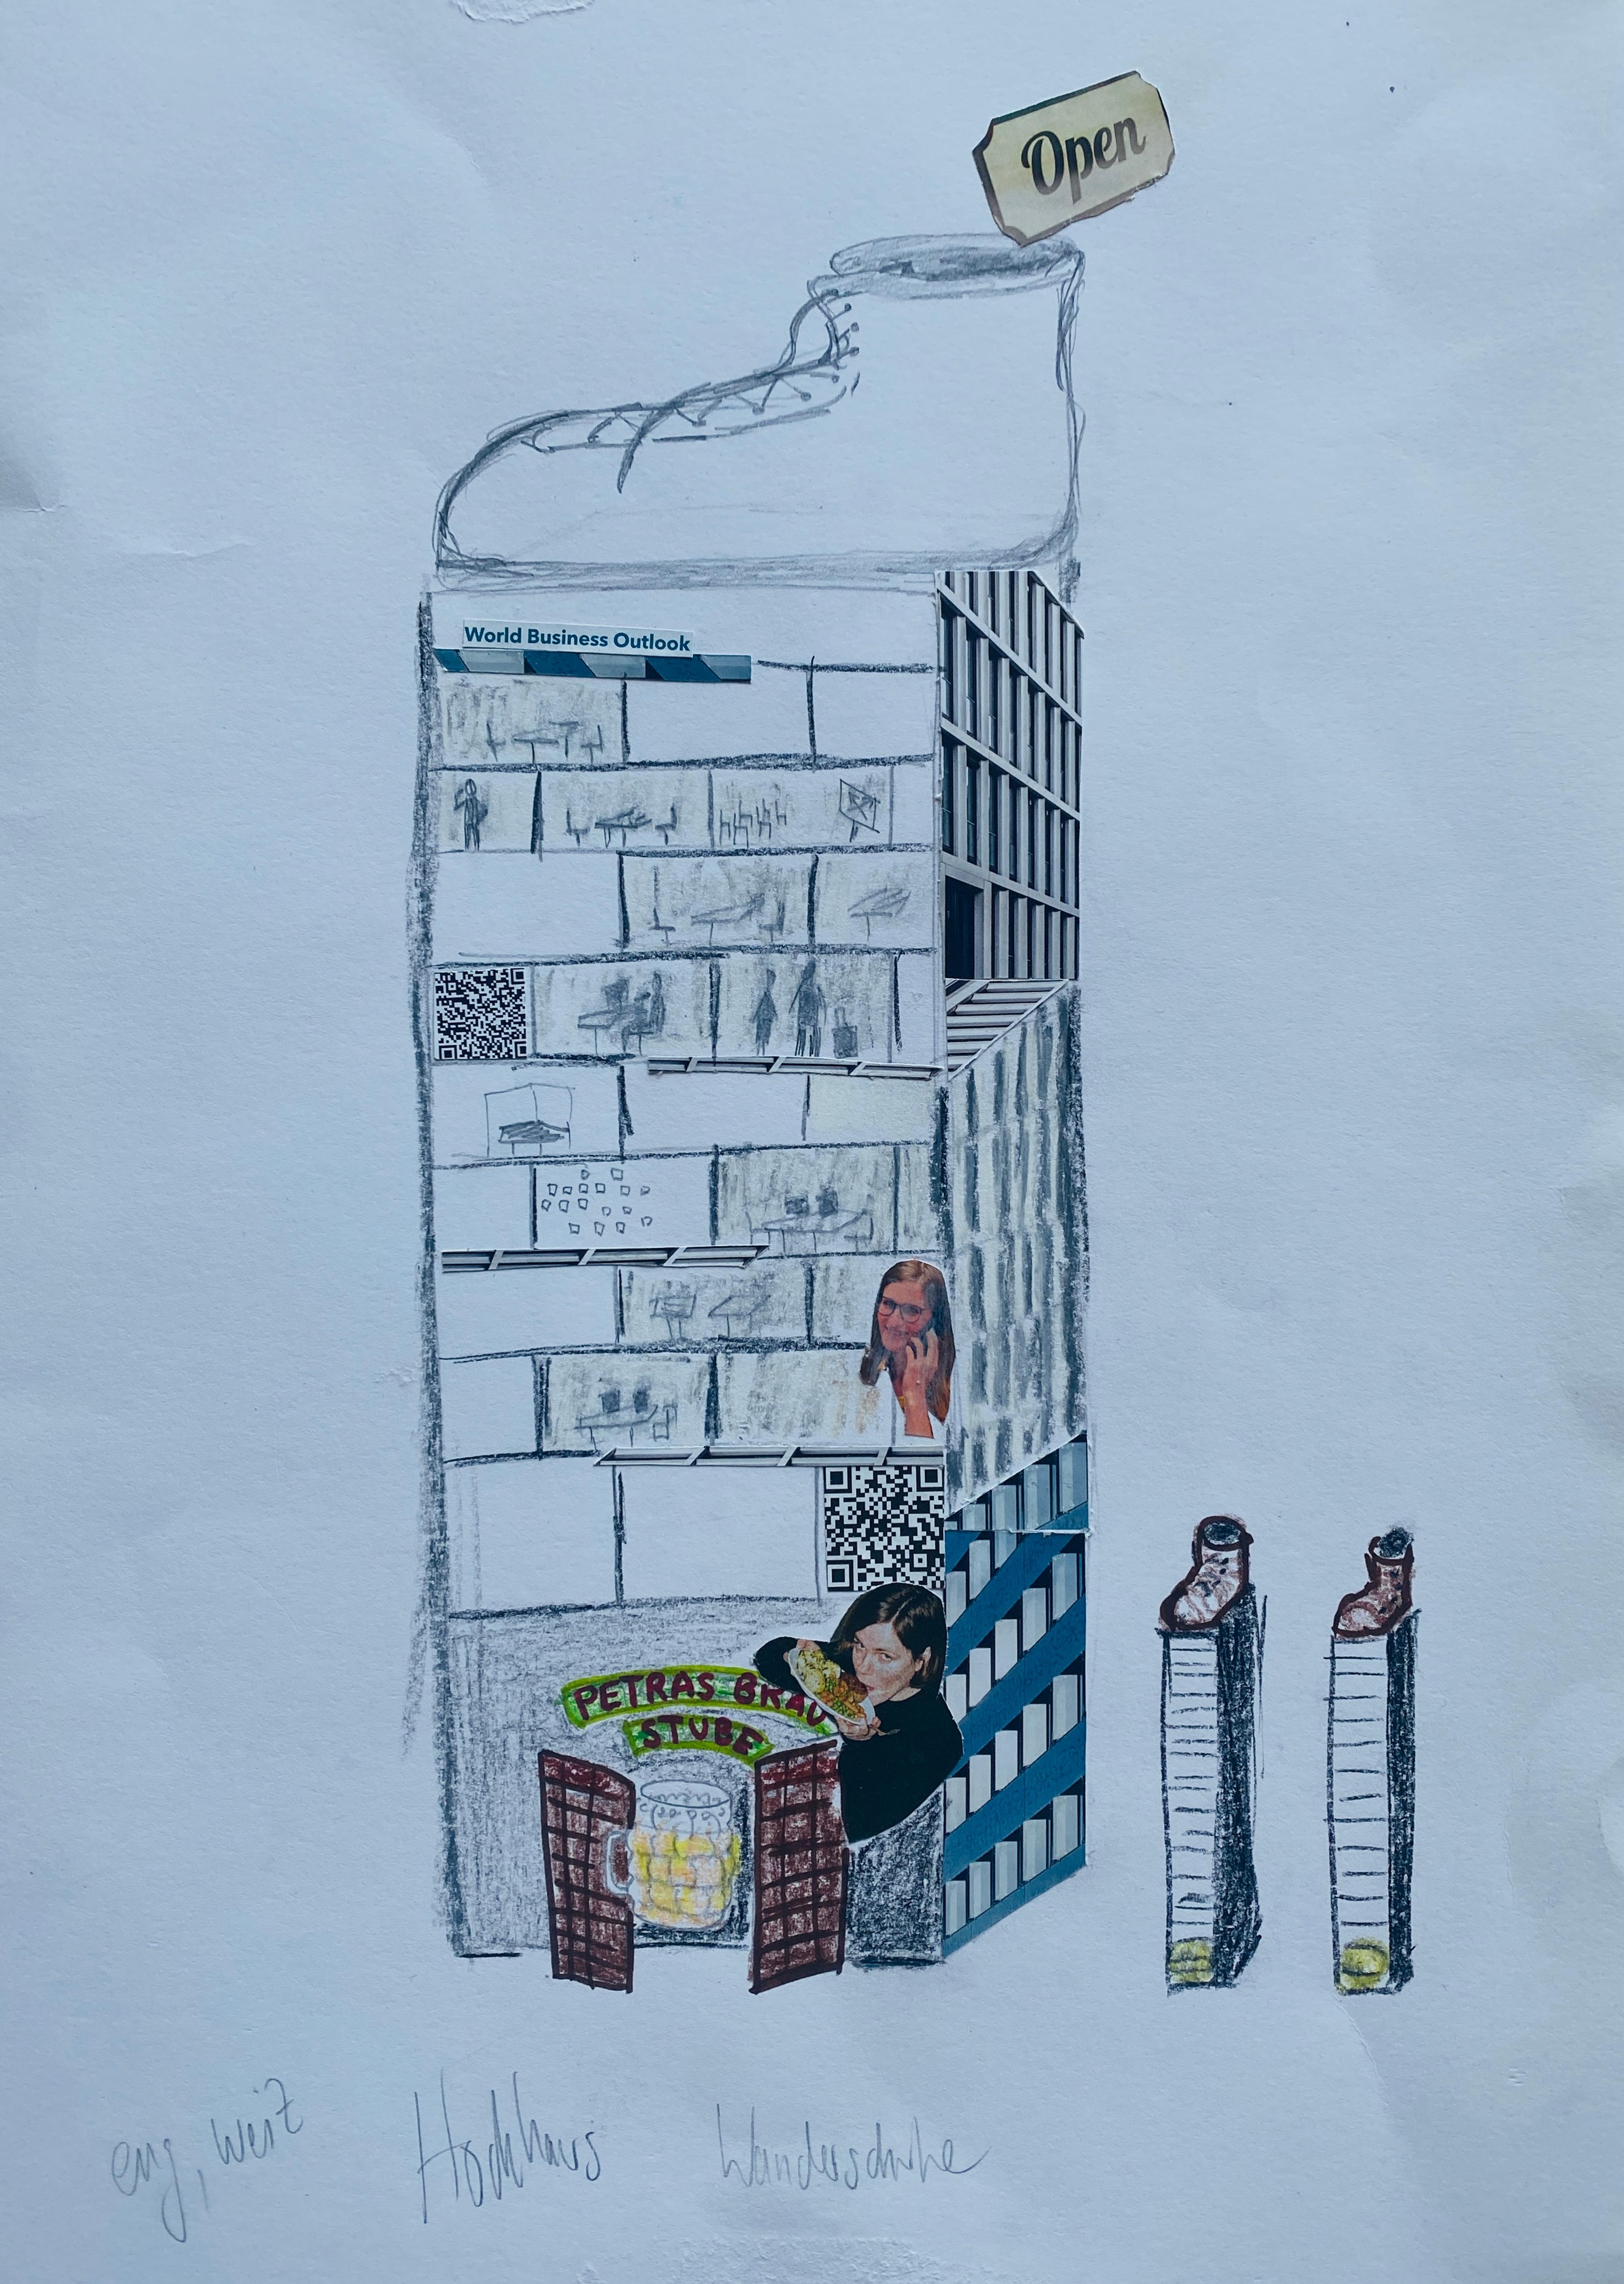 A hand-drawing and collage showing a tower with a shoe on the roof.